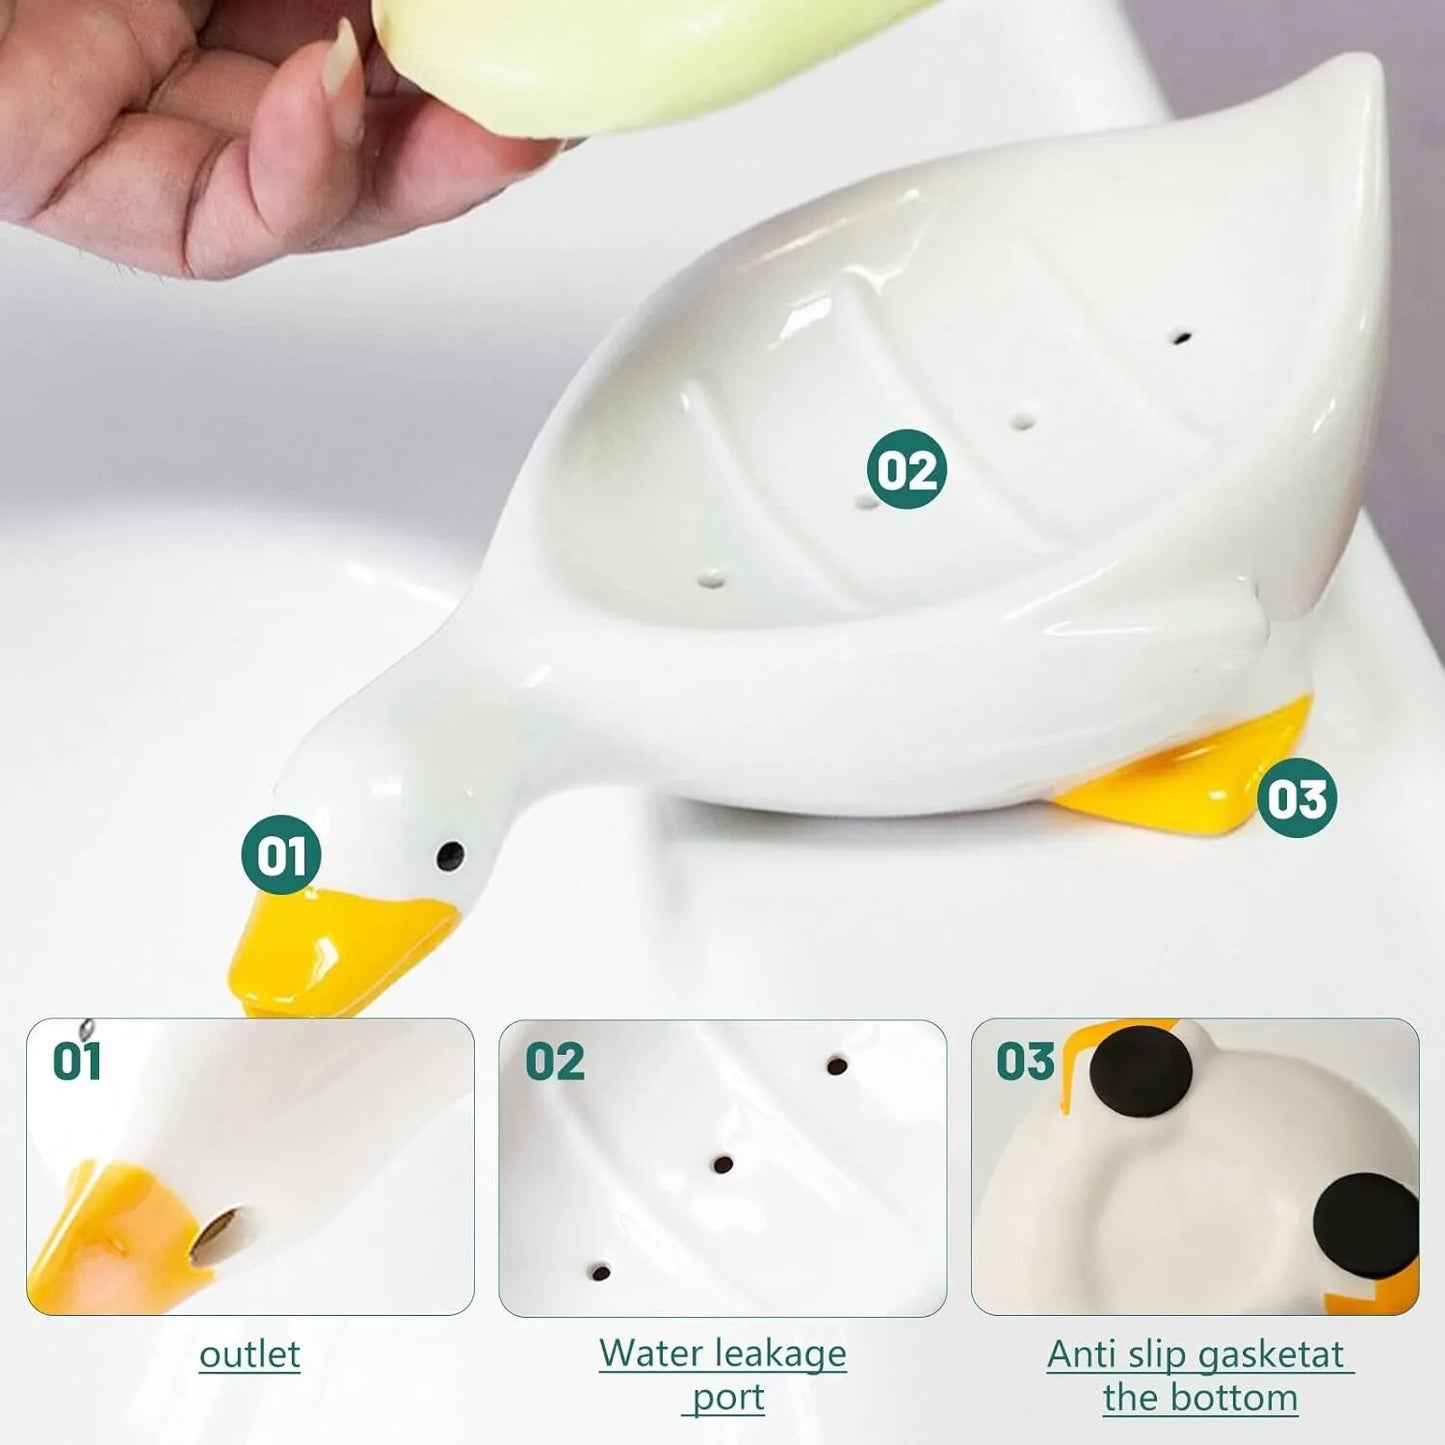 Durable Cute Duck Shaped Plastic Soap Dish - Self-Draining, Hygienic Holder for Bathroom & Kitchen Sink